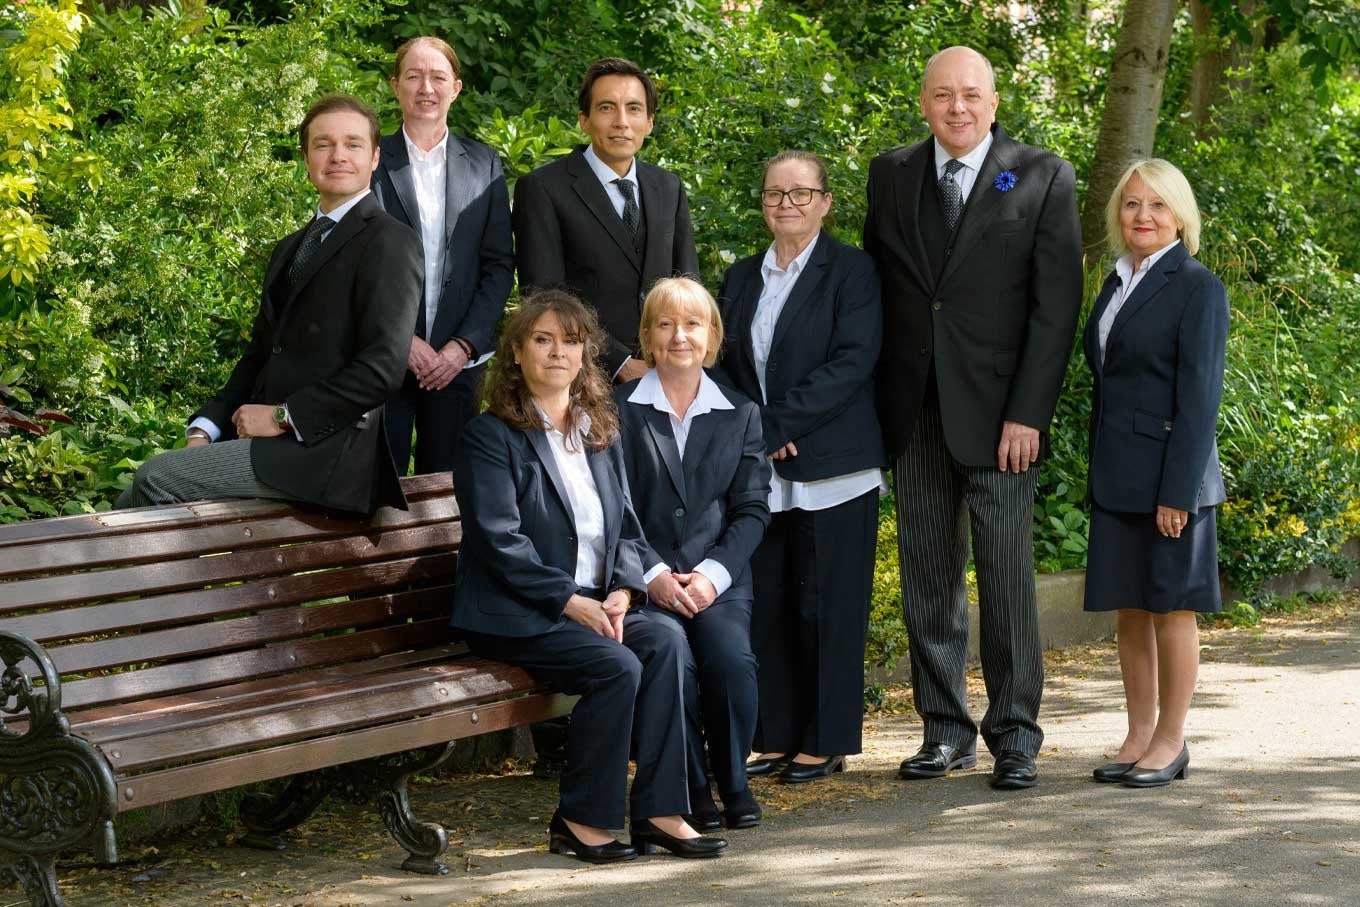 The team from JH Kenyon Funeral Directors in north London gather together at a local north London park